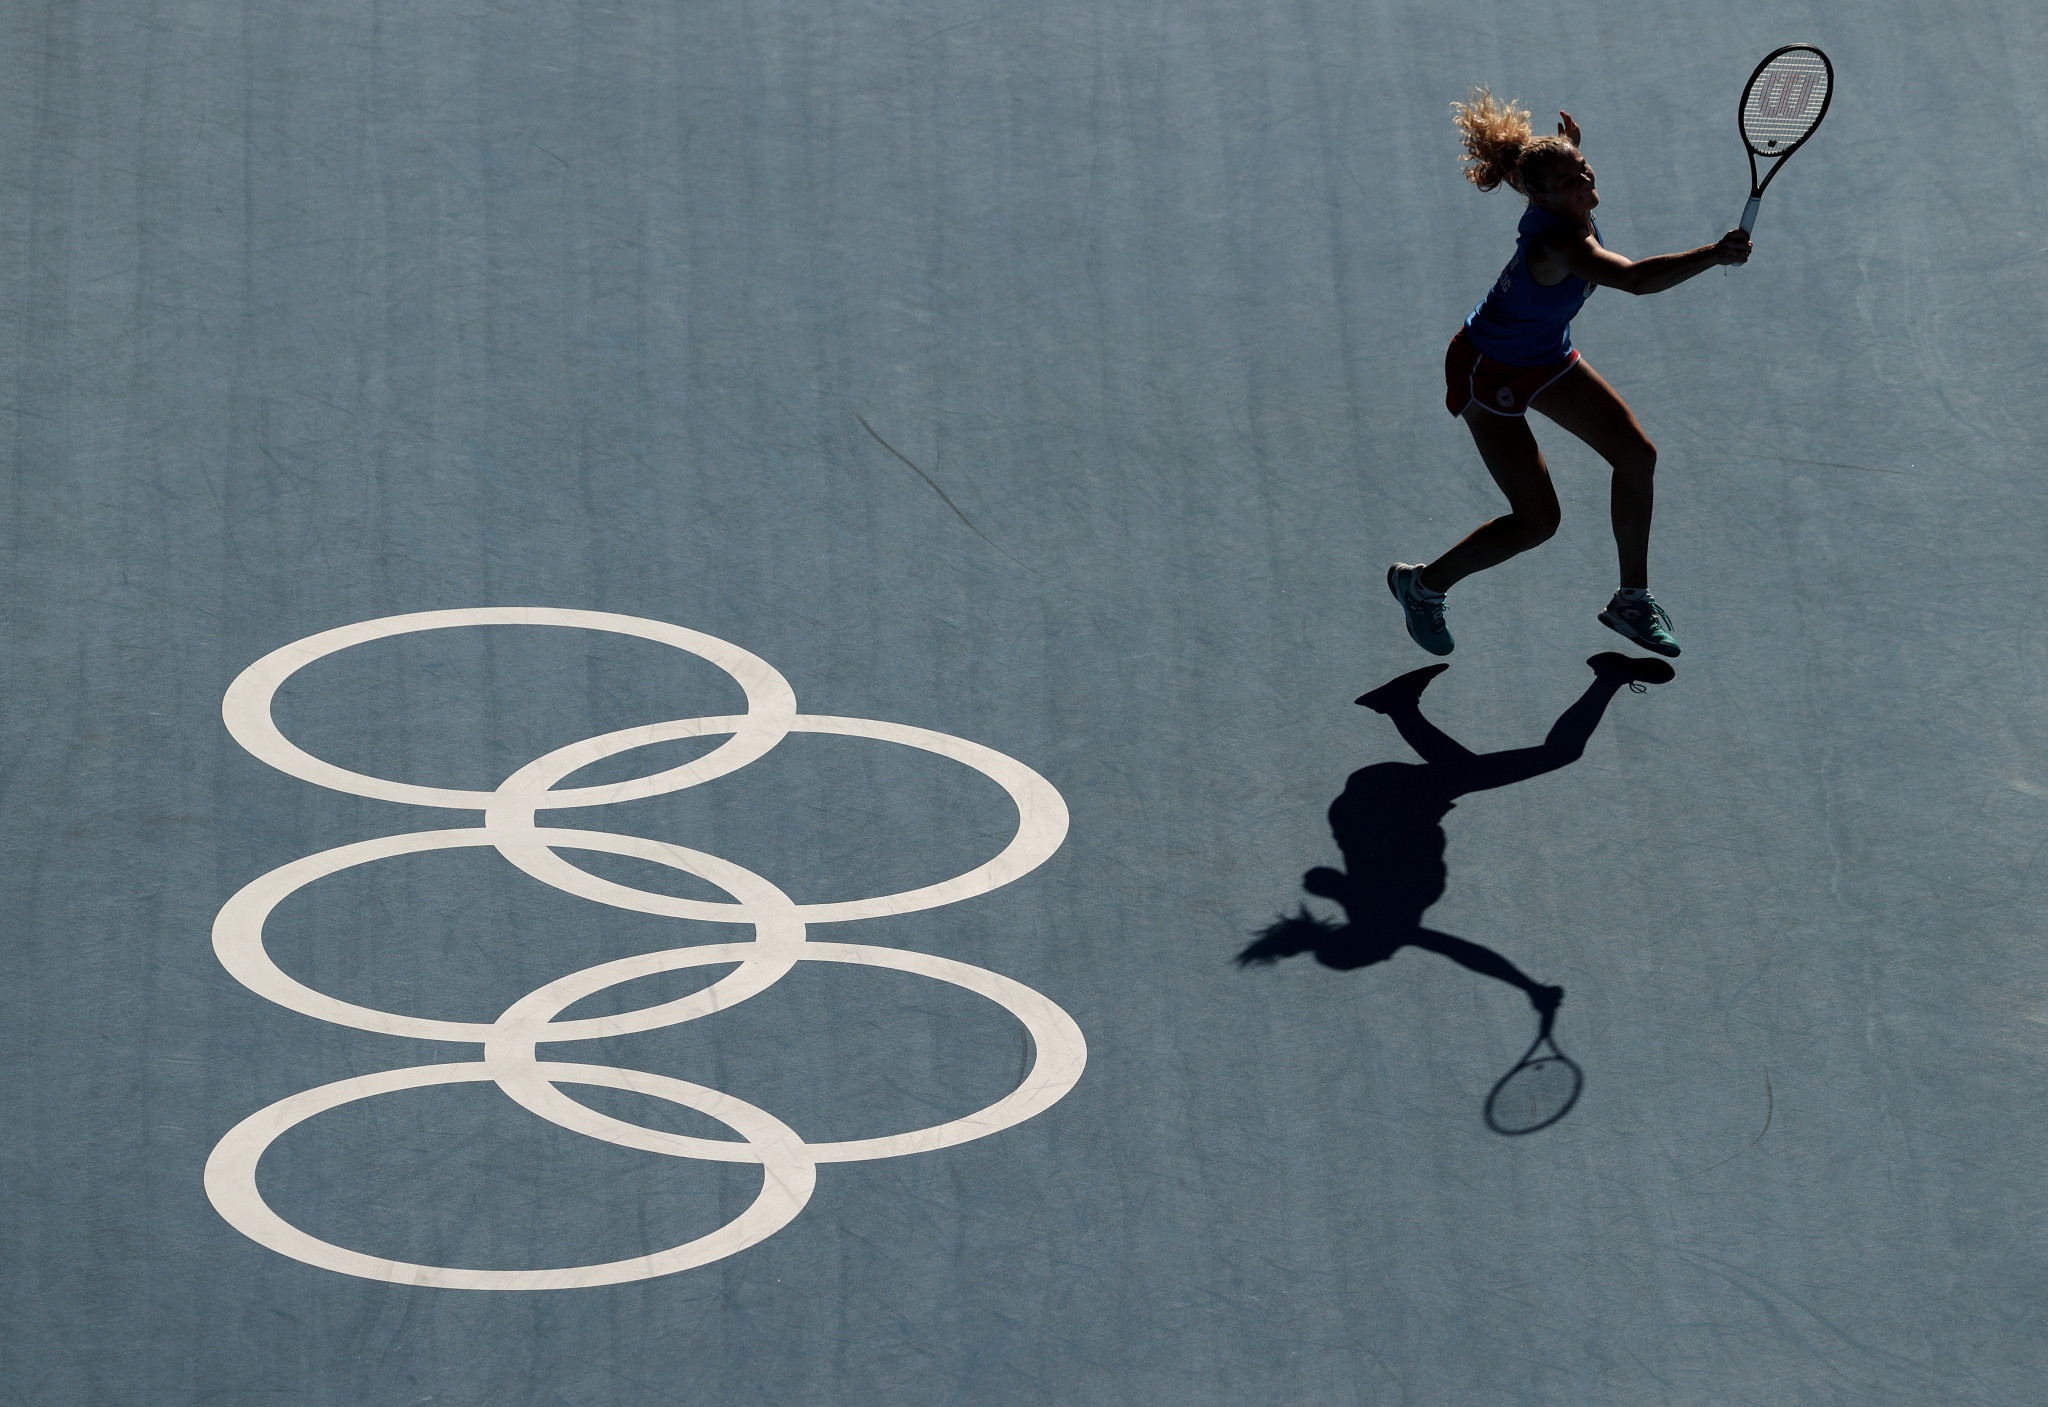 Qualification system for Paris 2024 Olympic tennis tournament revealed